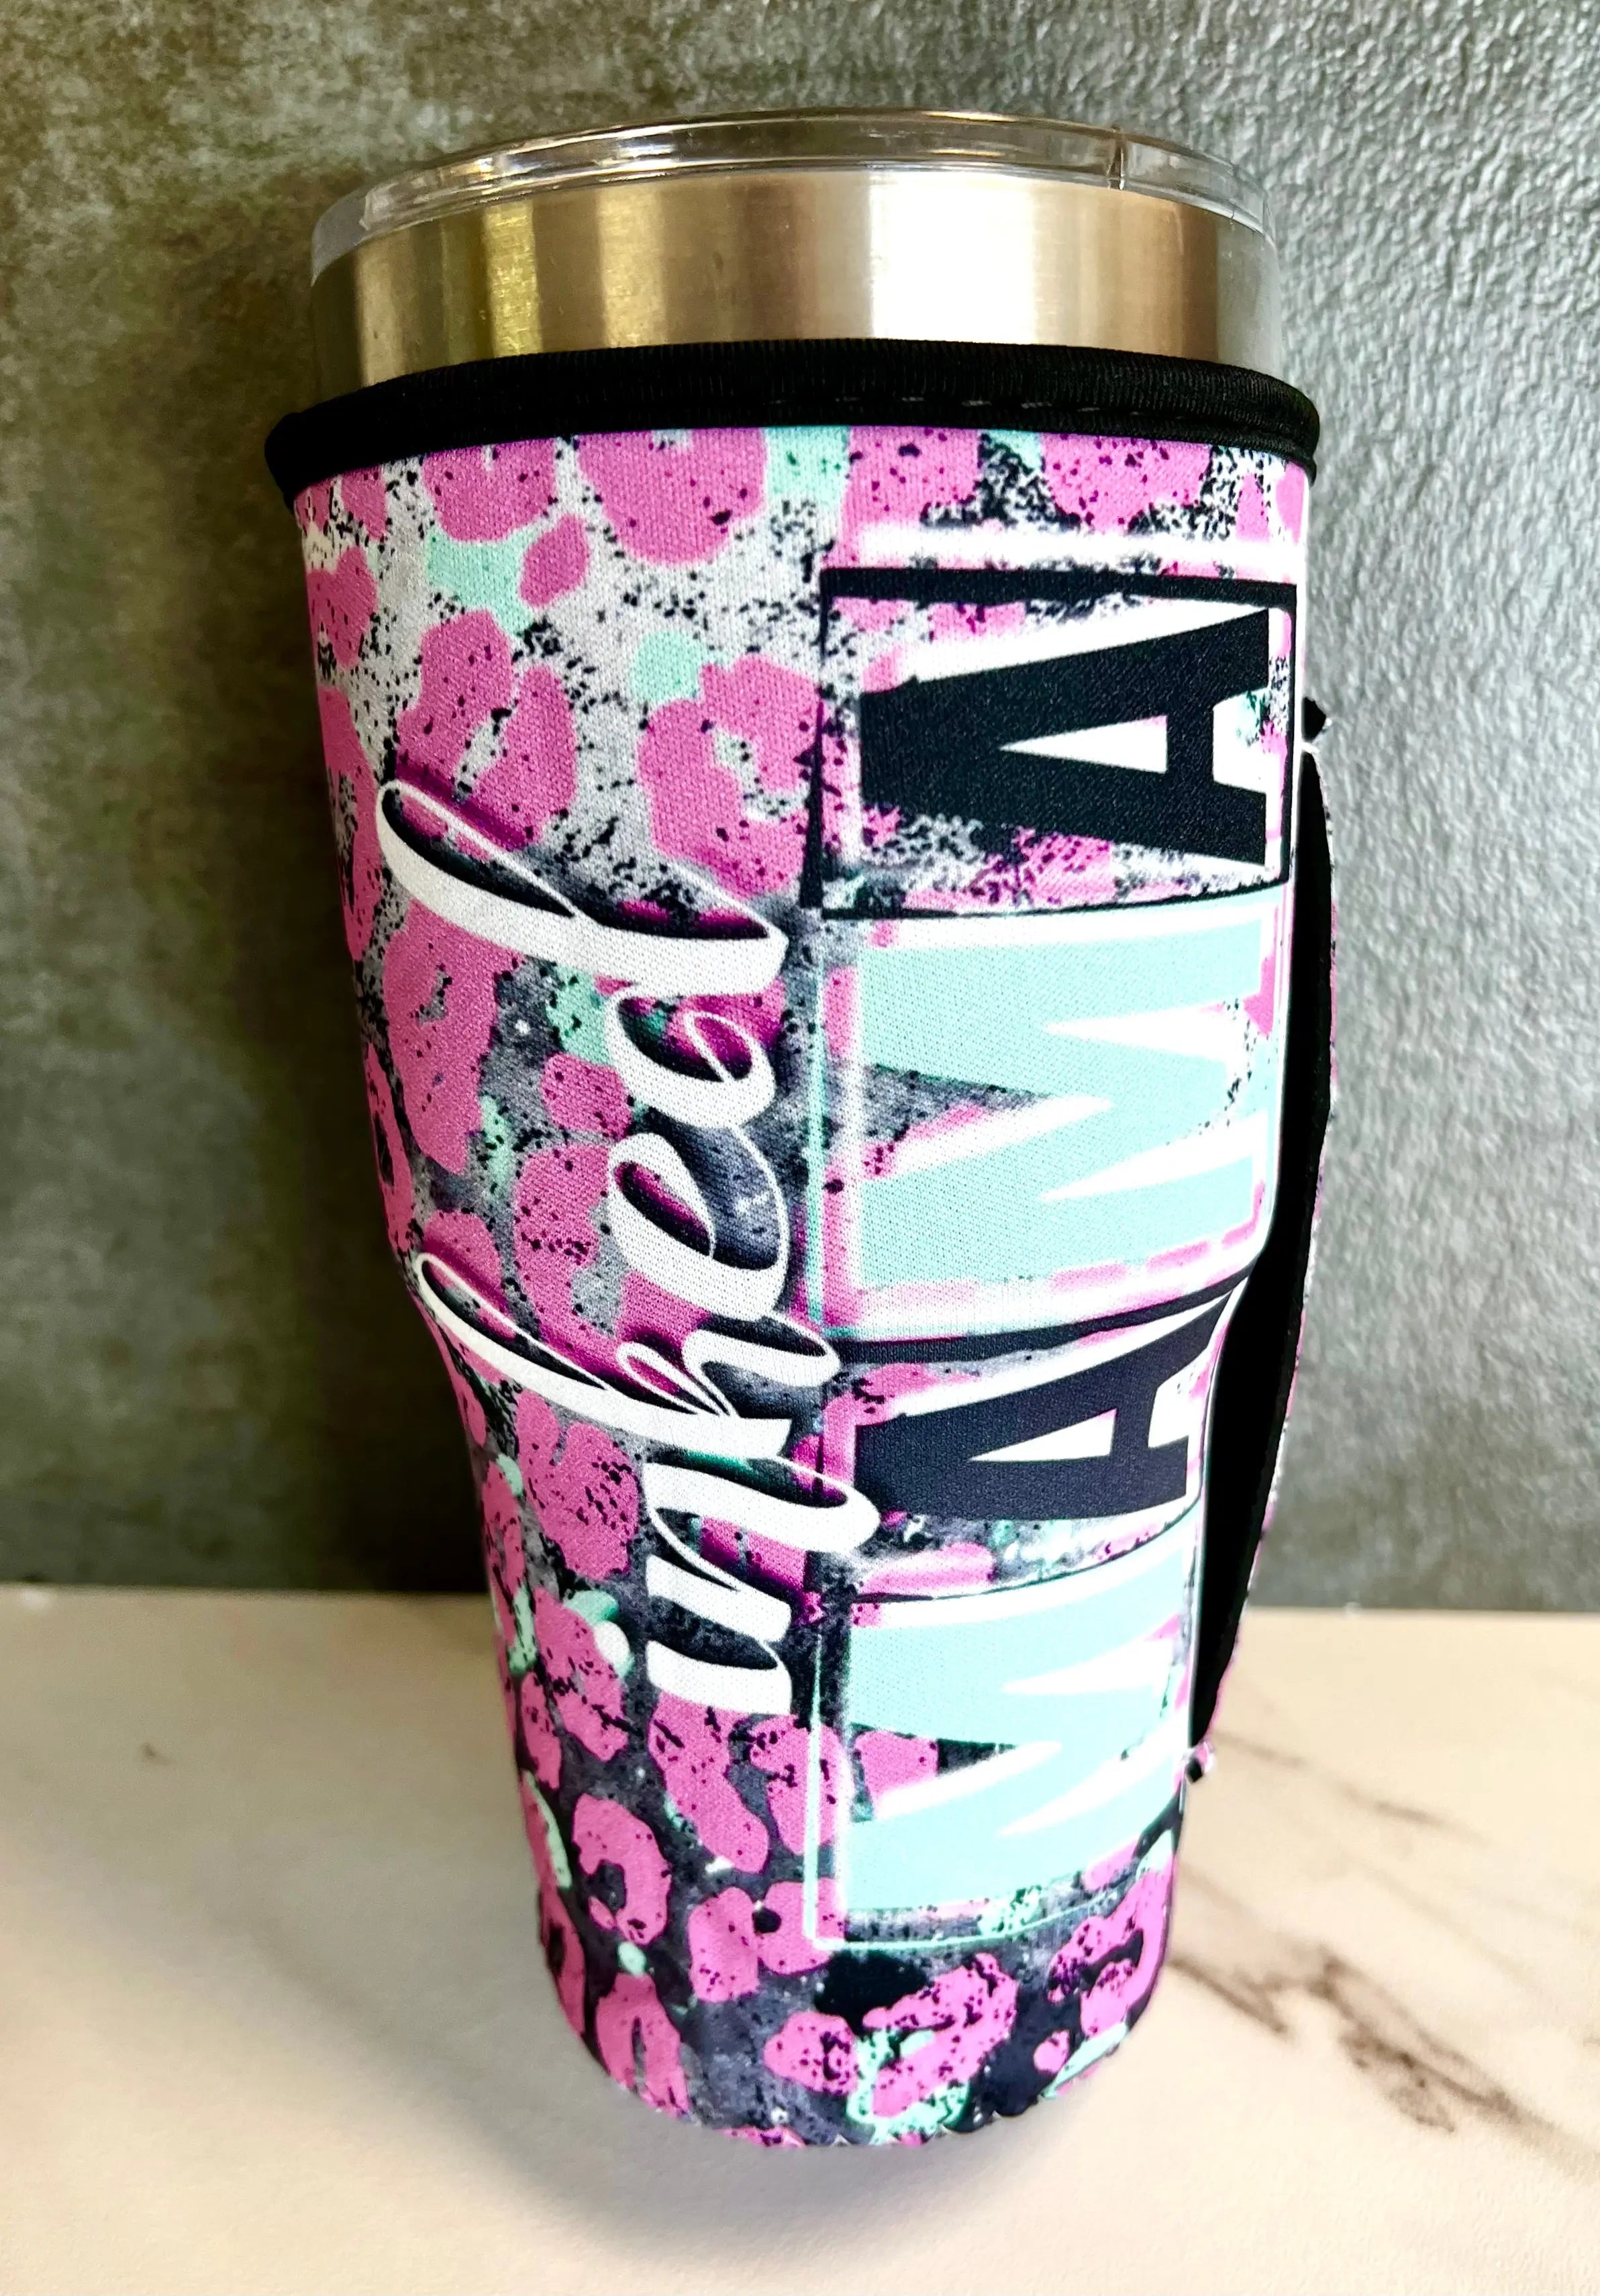 https://cdn.shopify.com/s/files/1/1826/7909/products/30-OZ-Inked-Mama-Insulated-Cup-Cover-Kim-s-Korner-Wholesale-1681702631.heic?v=1681702633